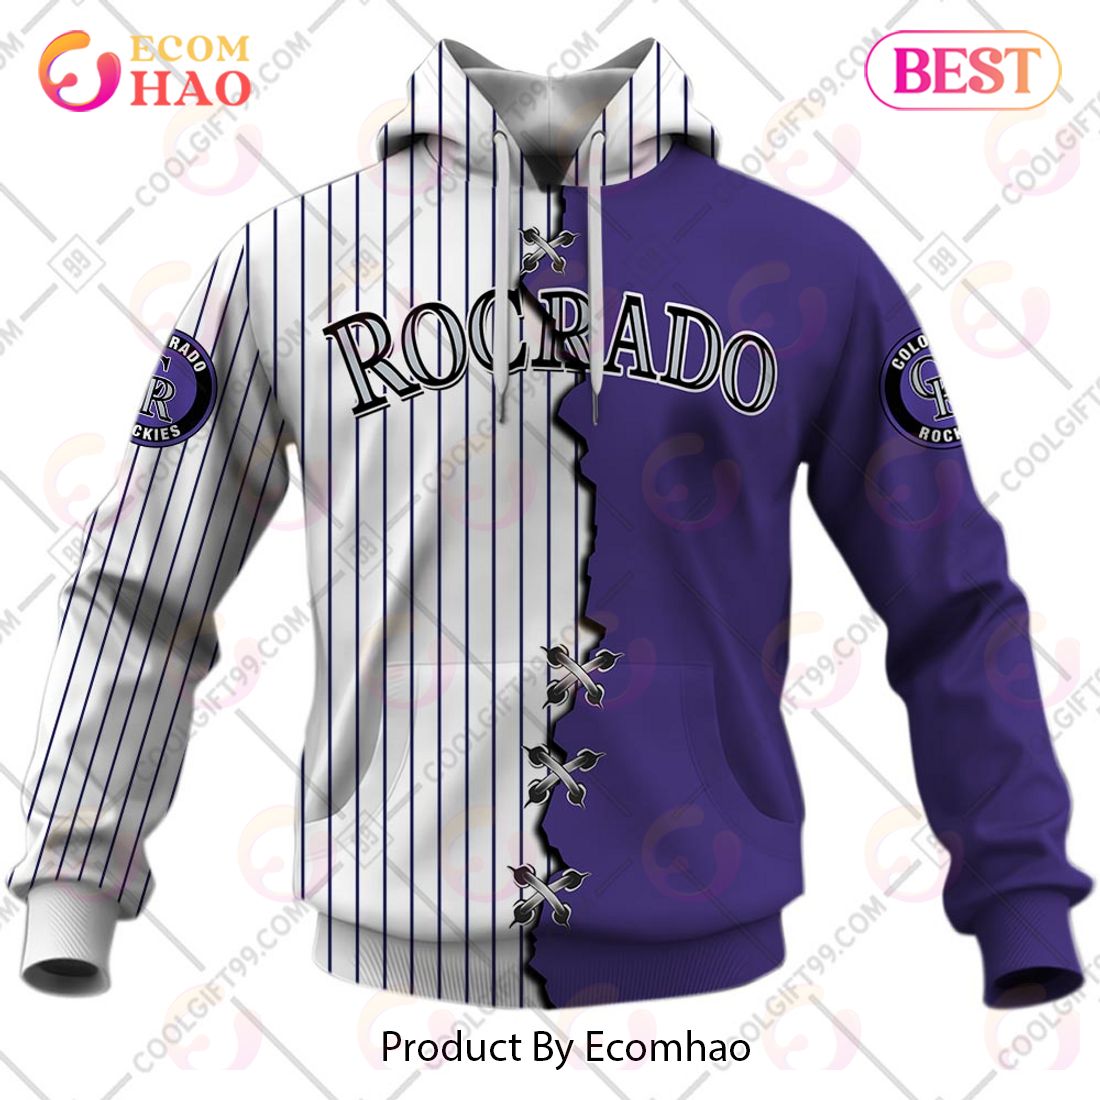 Colorado Rockies MLB Hawaiian Shirt 4th Of July Independence Day Best Gift  For Men And Women Fans